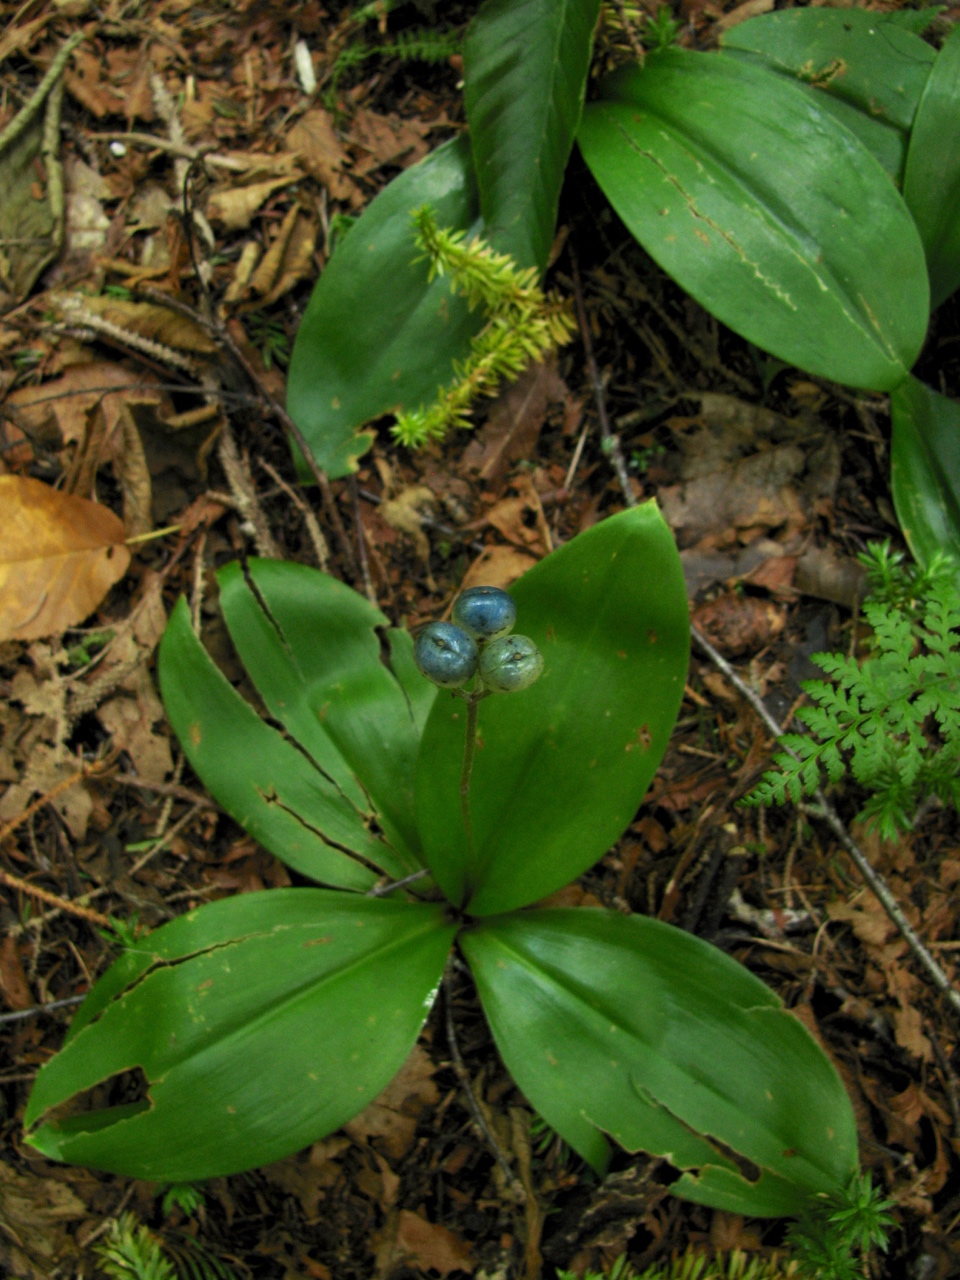 The Scientific Name is Clintonia borealis. You will likely hear them called Clinton's Lily, Yellow Clintonia, Bluebead Lily. This picture shows the Fruit turning blue in color when mature of Clintonia borealis